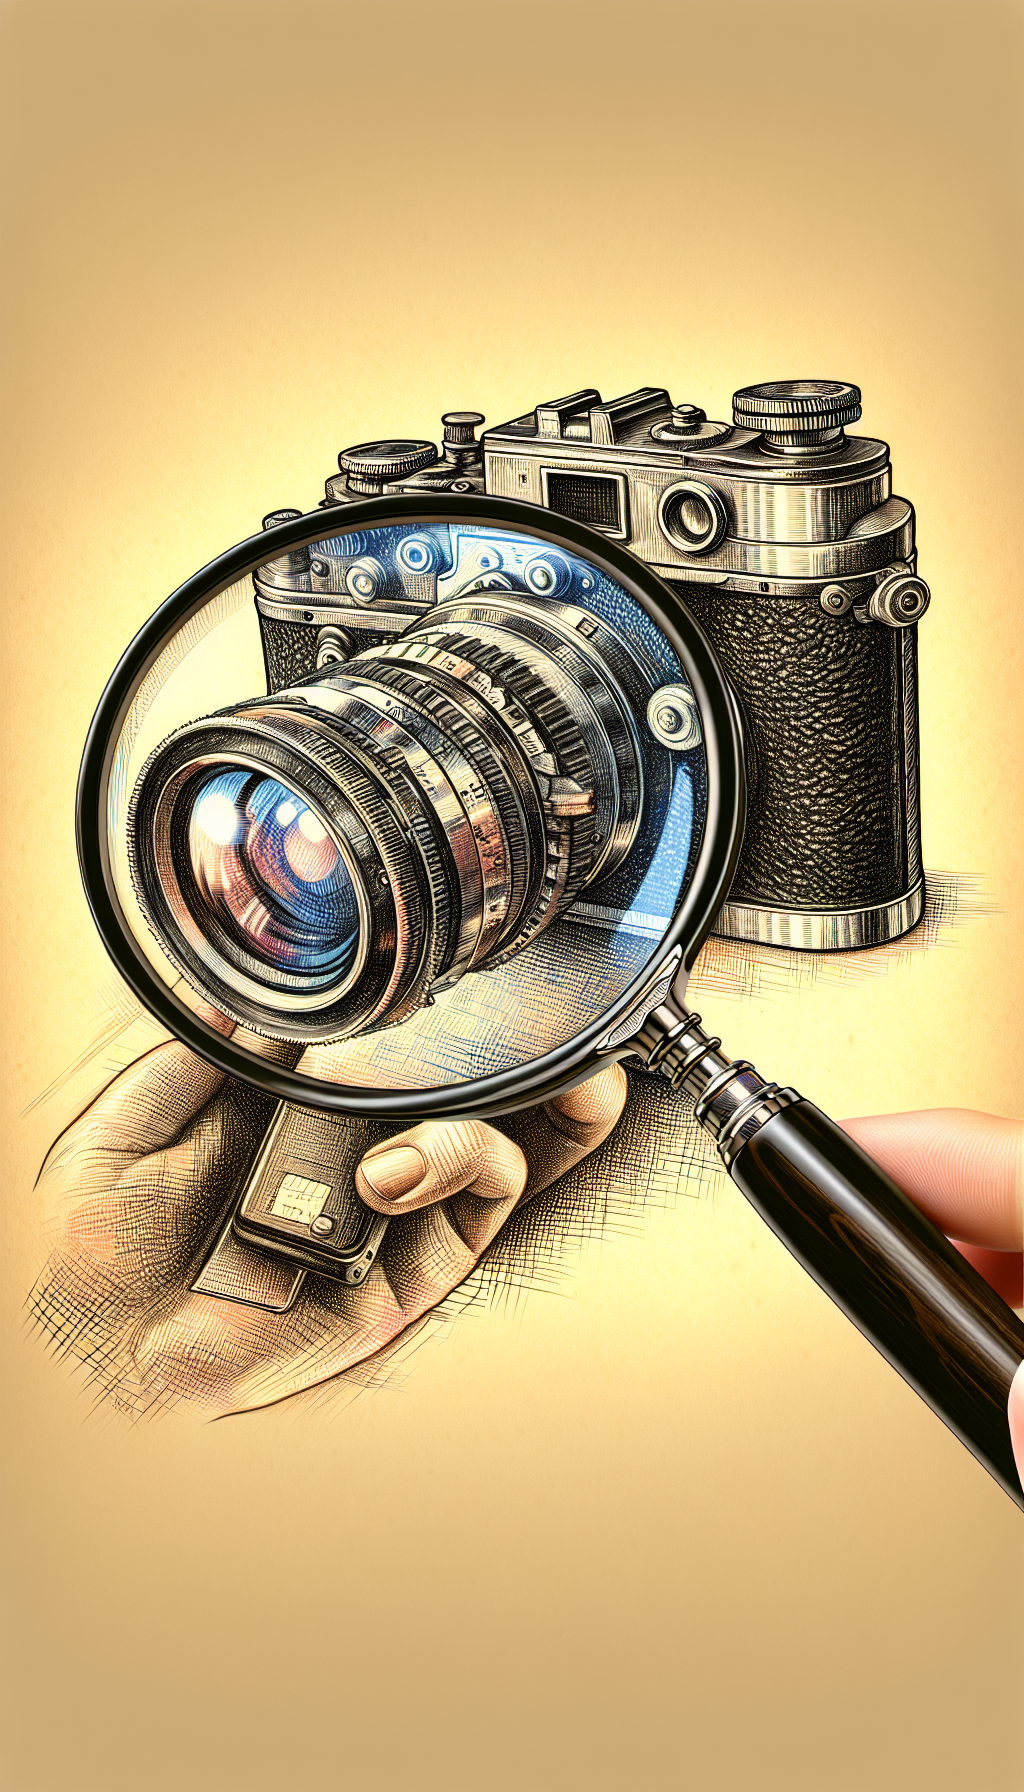 An illustrated magnifying glass hovers over an antique camera, revealing detailed imagery of its worn textures and unique features in the lens reflection, with a subtle price tag hanging from the camera that glimmers as if to suggest the hidden value in its vintage charm. The image is a collage of pencil sketches and vibrant, digital colors, juxtaposing old with new.